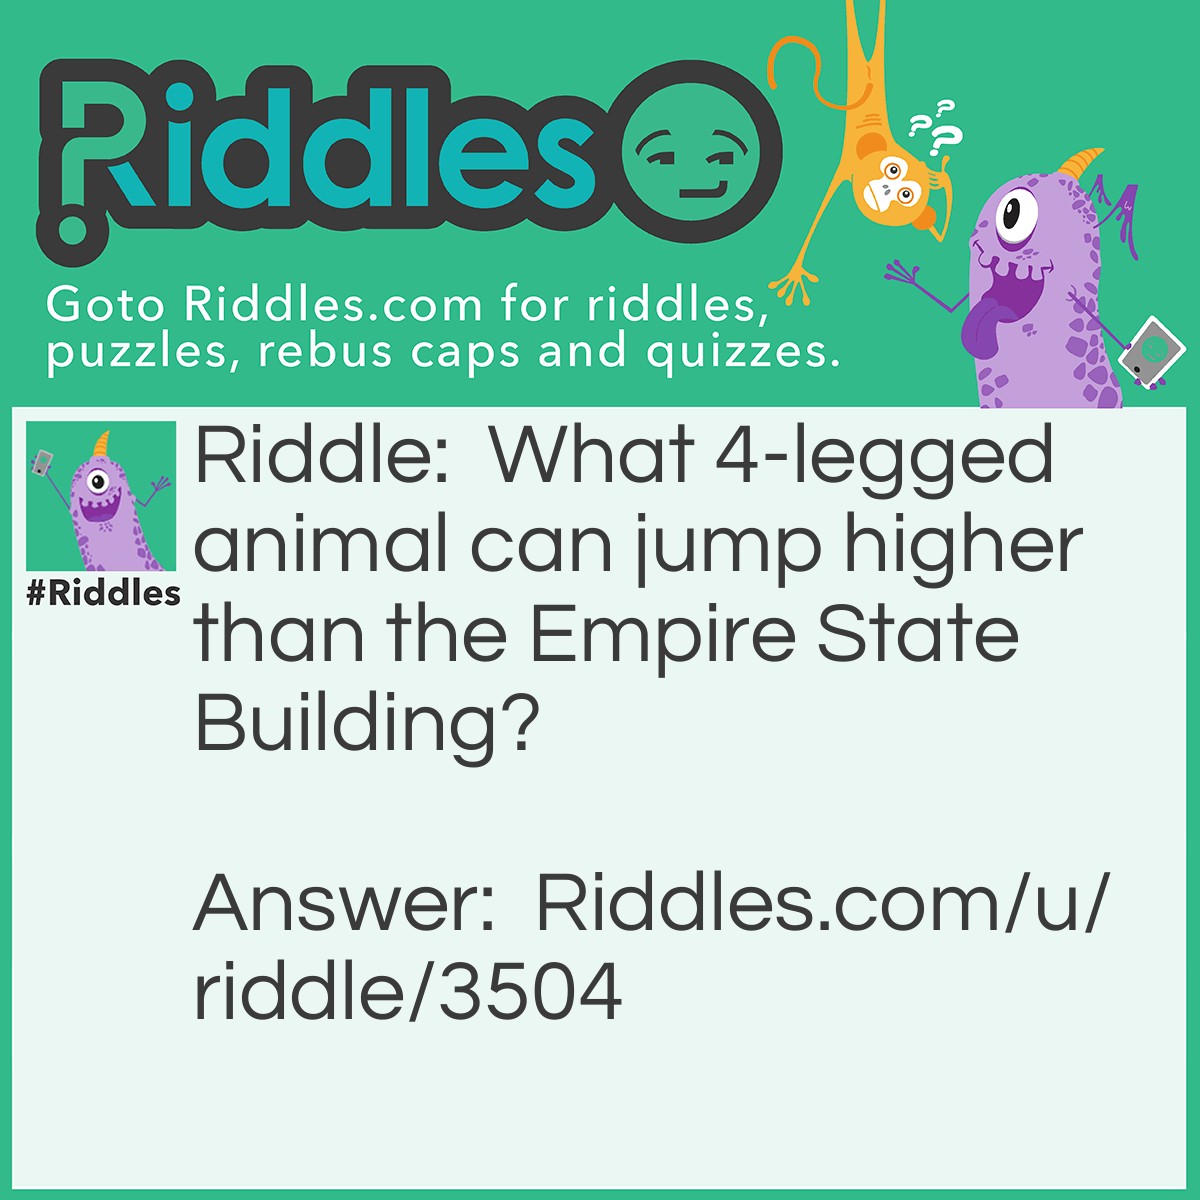 Riddle: What 4-legged animal can jump higher than the Empire State Building? Answer: Any - the Empire State Building can't jump!